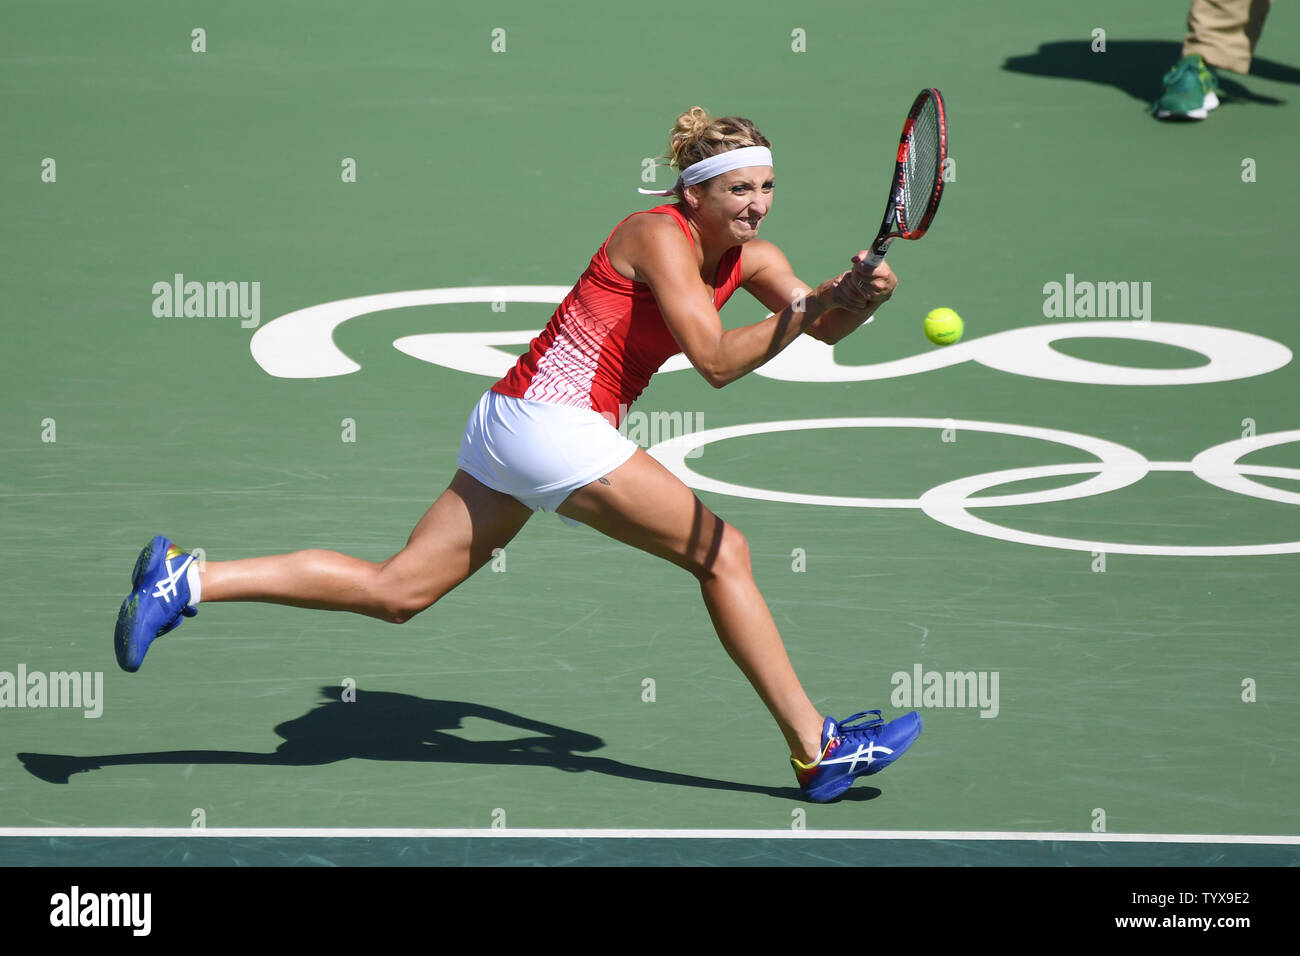 Timea Bacsinszky of Switzerland returns a volley during the gold medal match against Russia in women's doubles finals at the Olympic Tennis Stadium at the 2016 Rio Summer Olympics in Rio de Janeiro, Brazil, on August 14, 2016. Russia won the match and the gold medal and Switzerland the silver.        Photo by Richard Ellis/UPI. Stock Photo